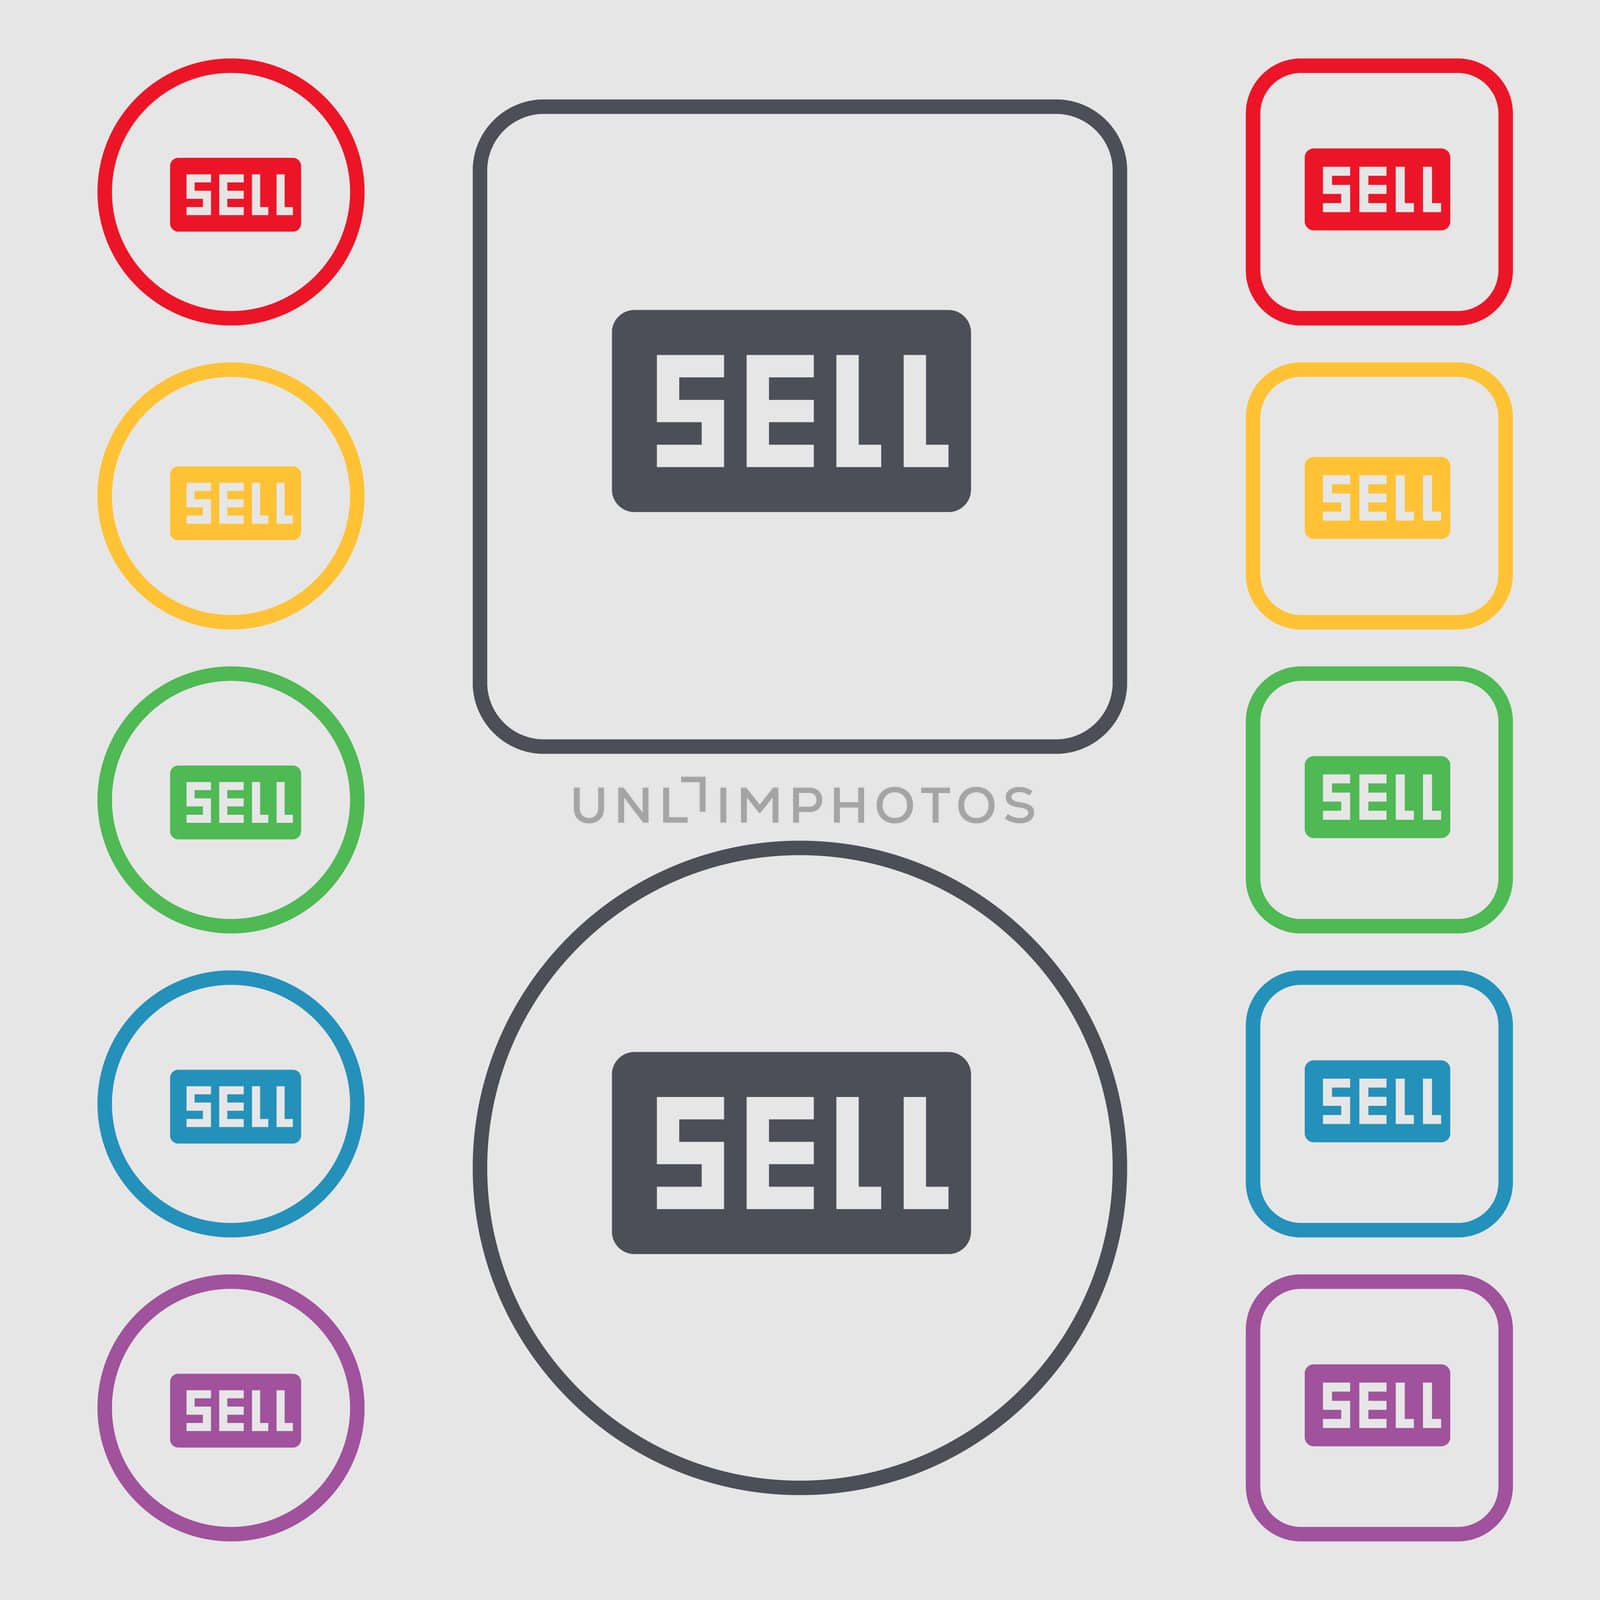 Sell, Contributor earnings icon sign. symbol on the Round and square buttons with frame. illustration